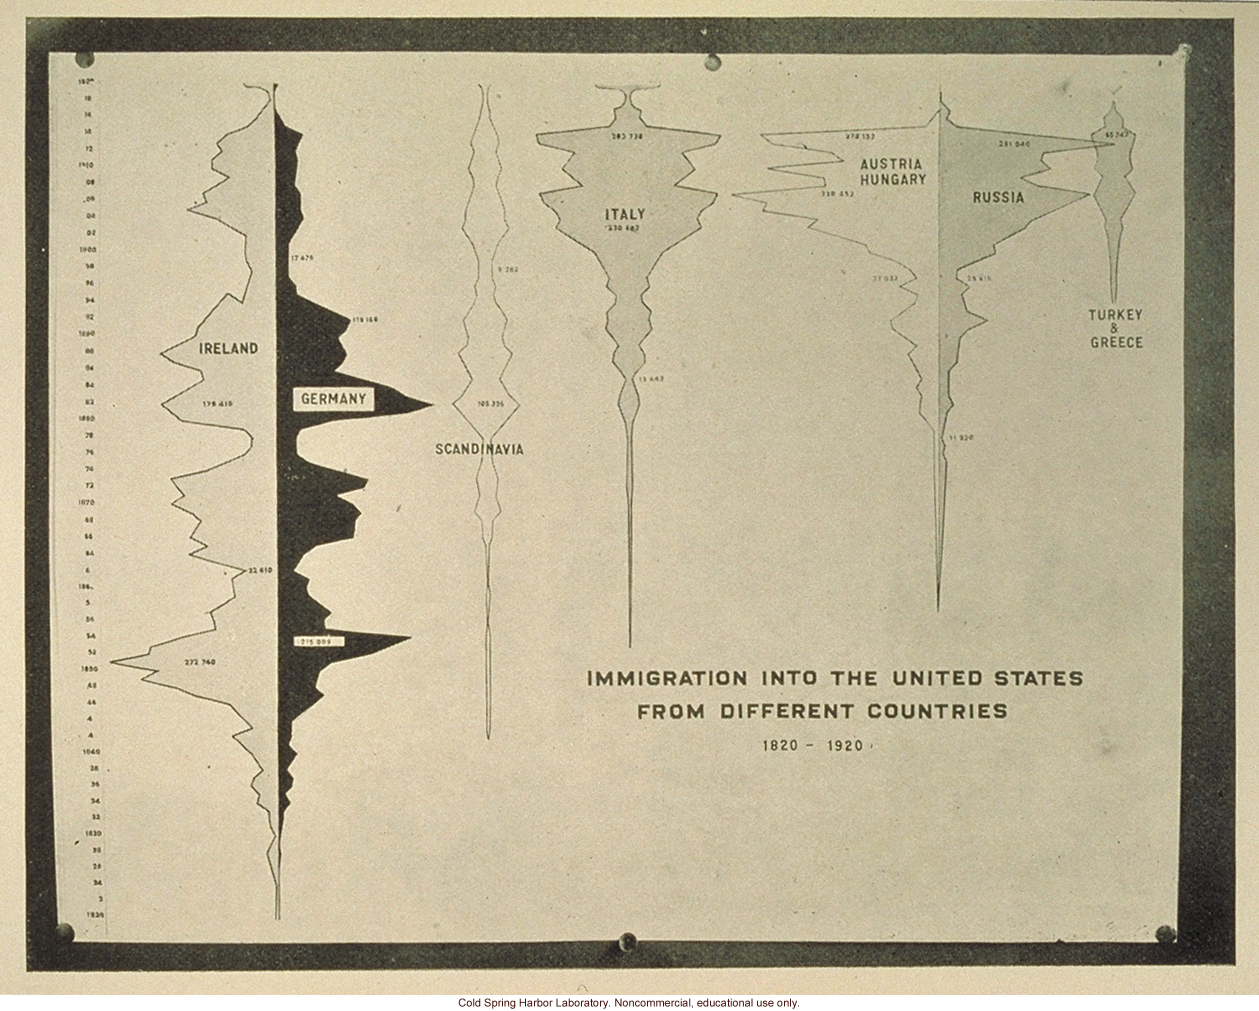 &quote;Immigration into United States from different countries, 1820-1920&quote;